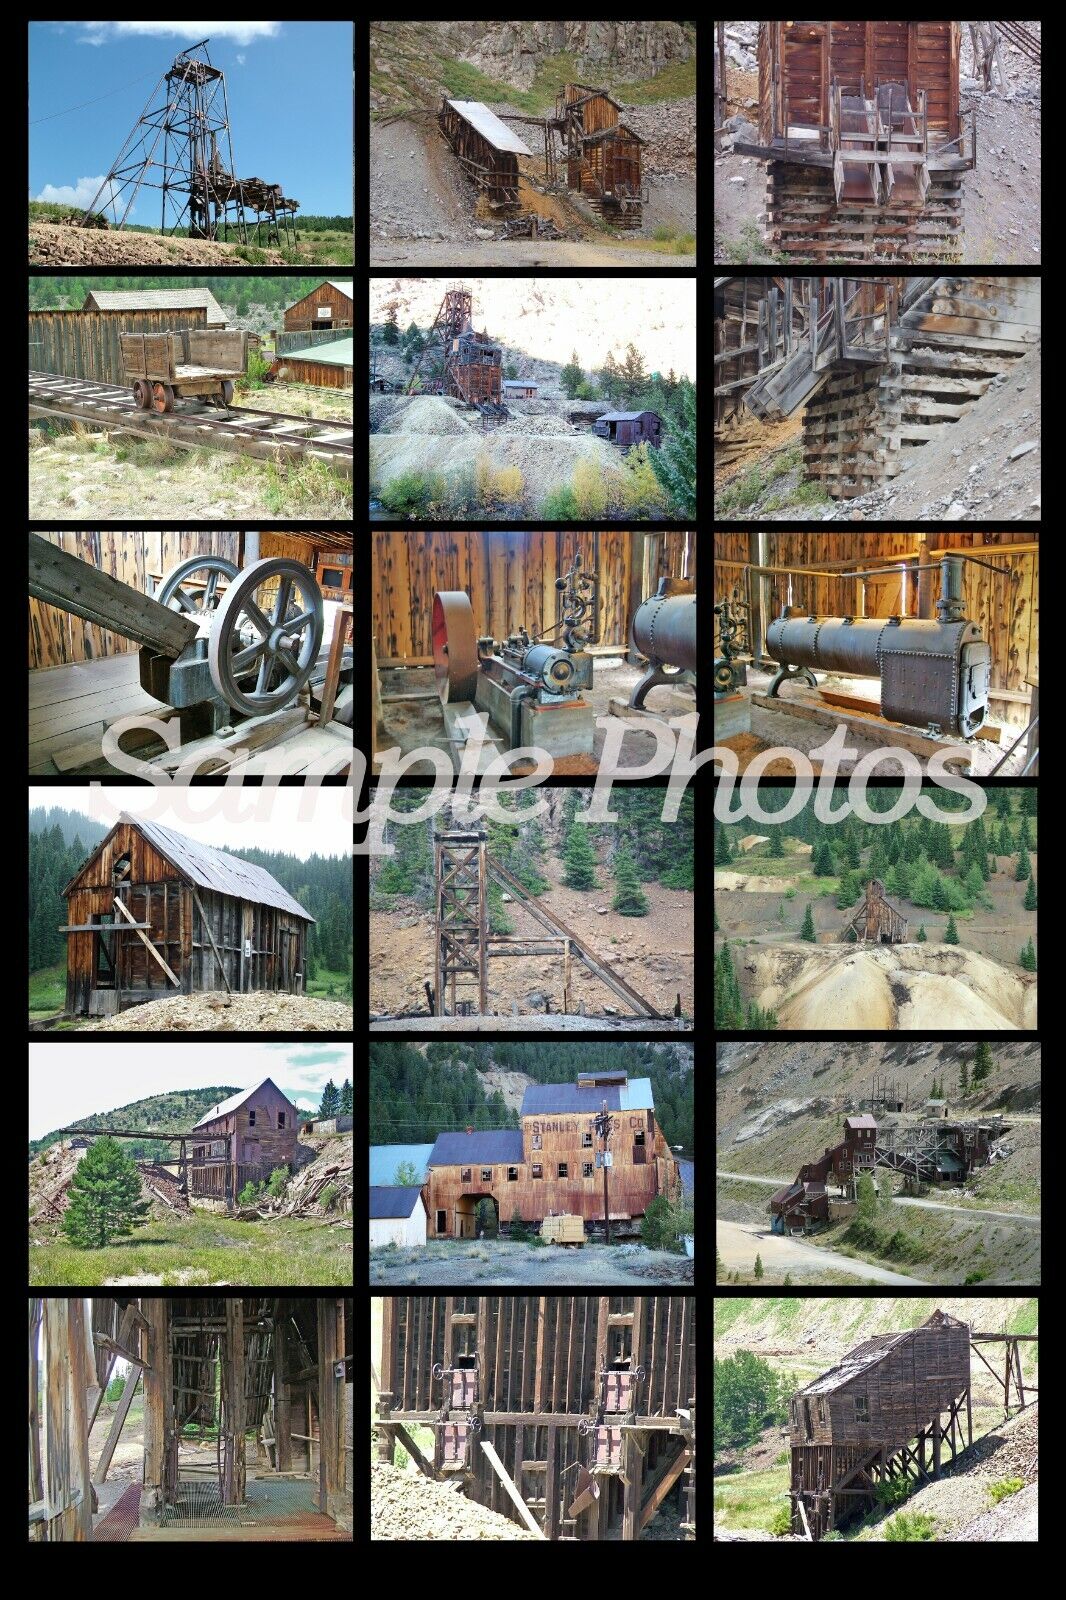 No Frills CD Picture Guide to Colorado Ore Mines Volume 1 Over 300 Photographs